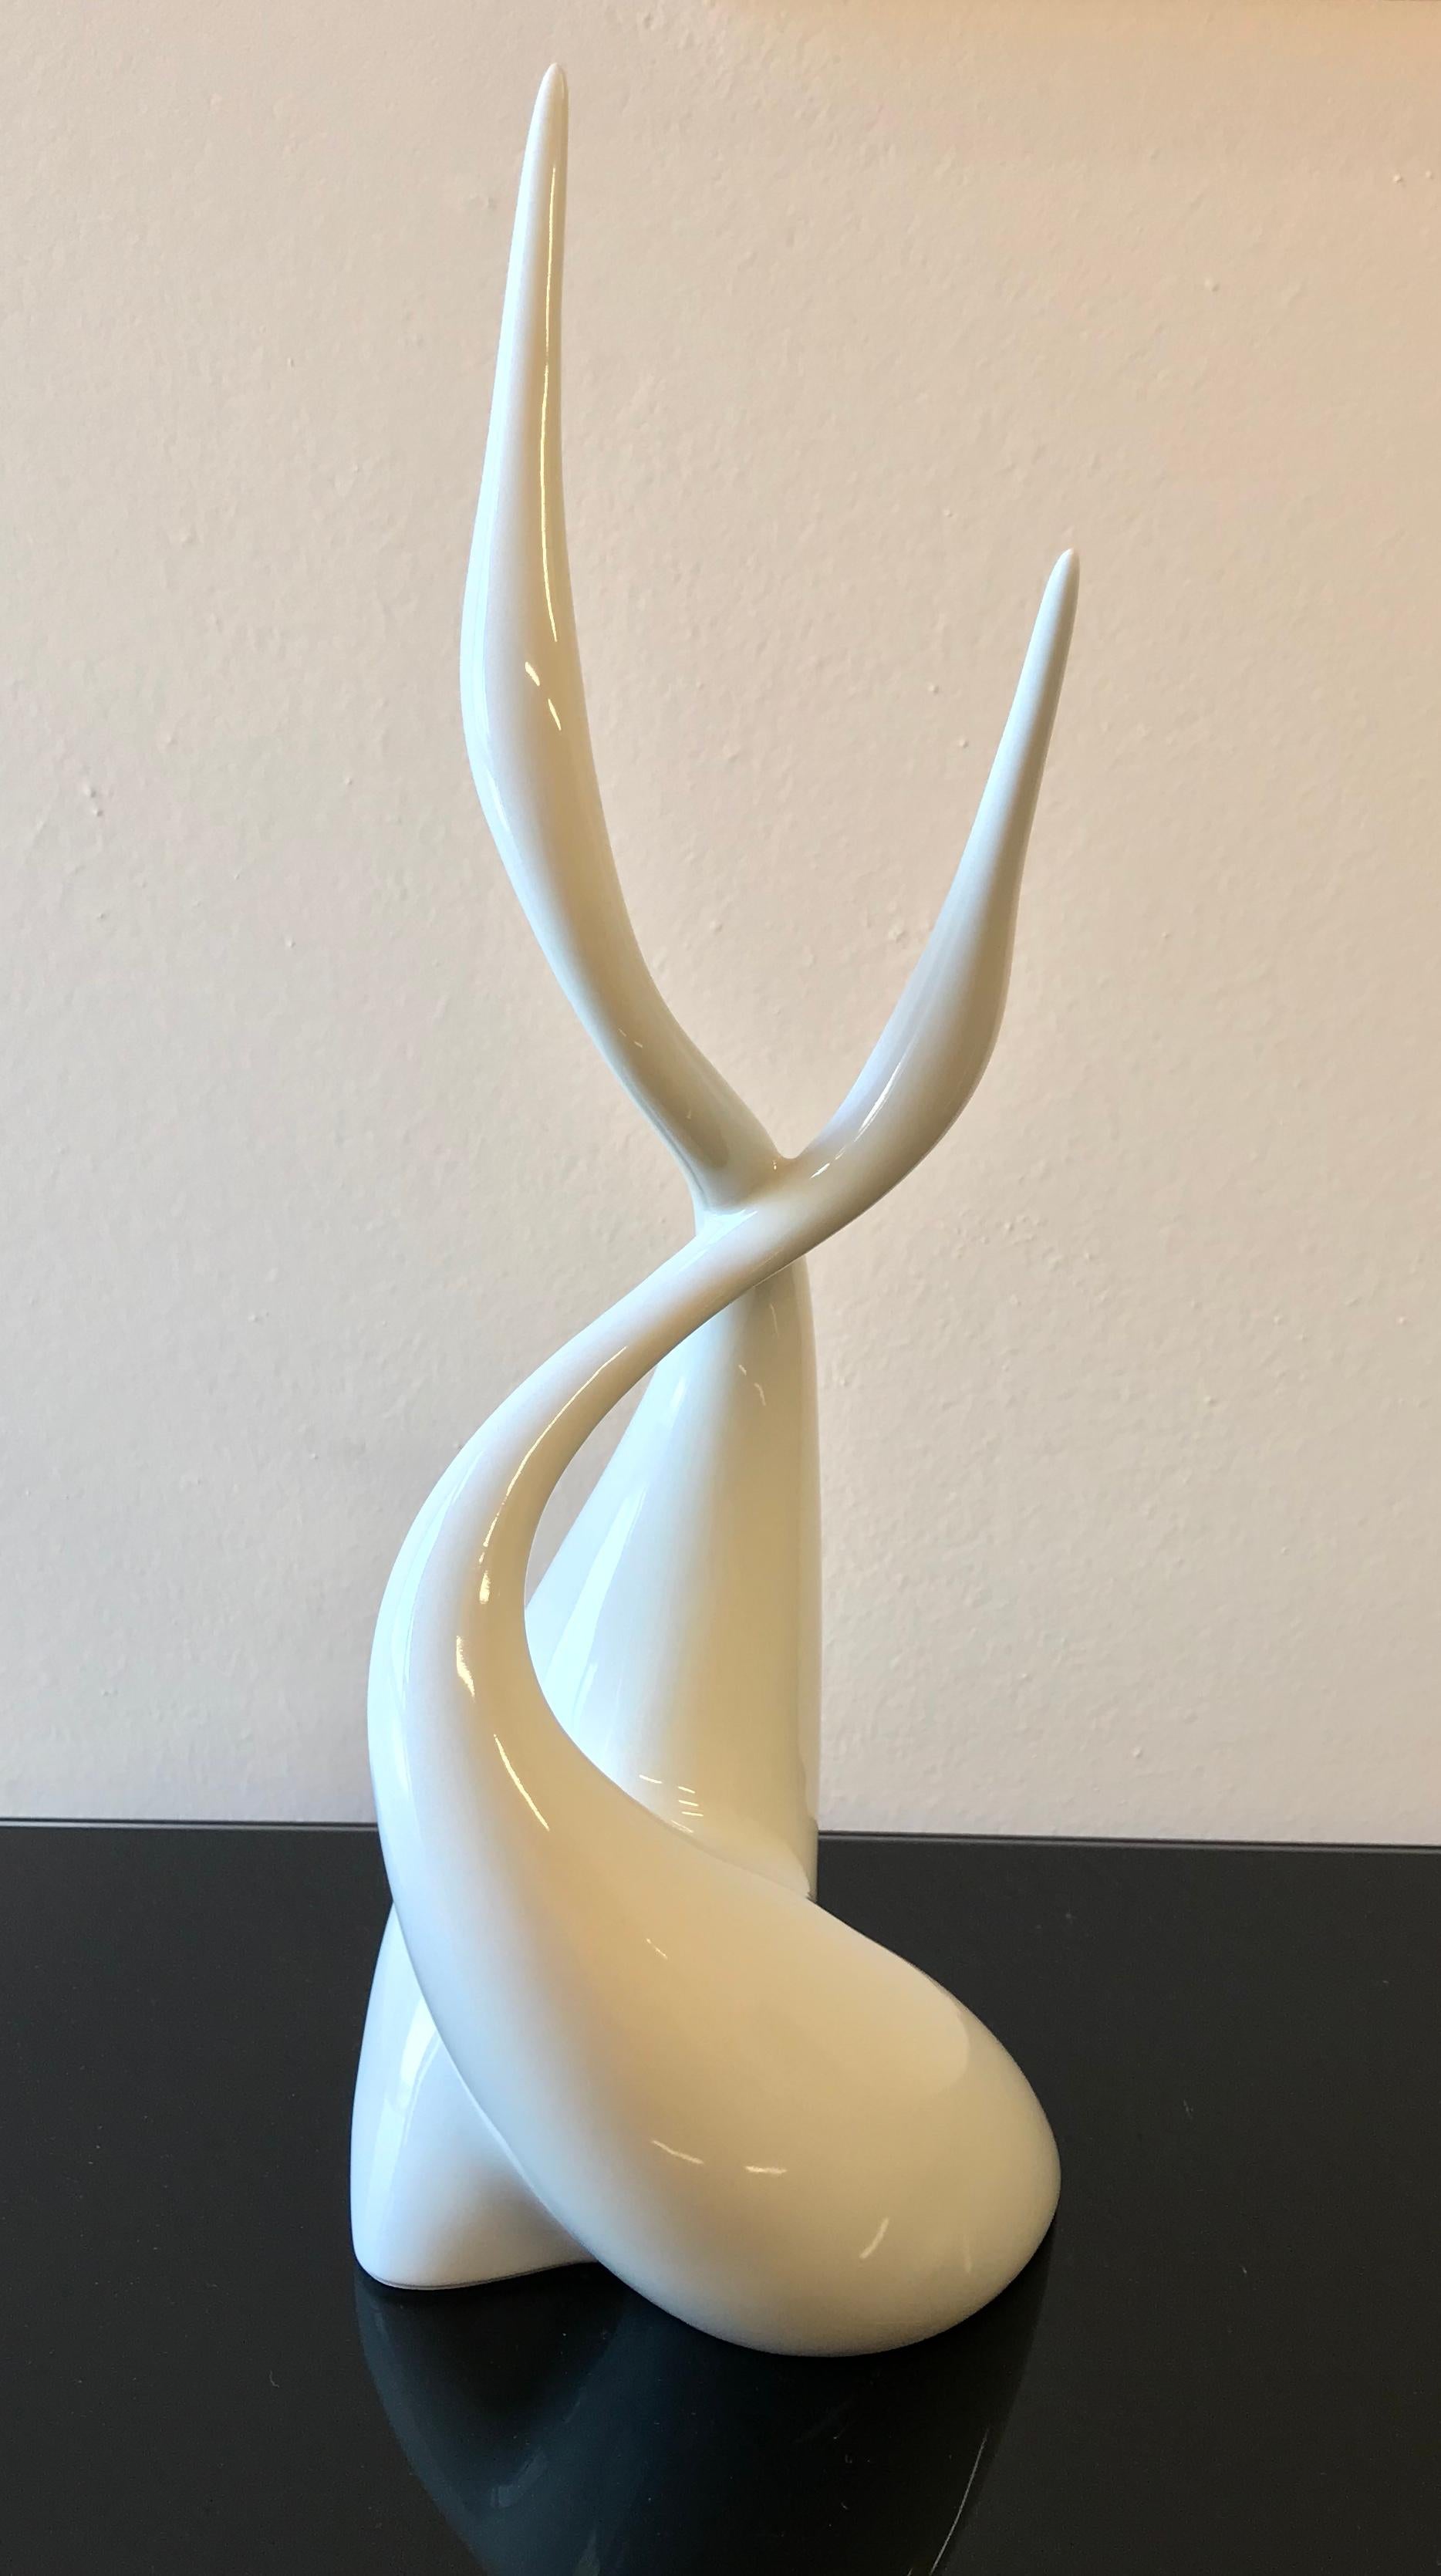 This elegant and fine Royal Dux porcelain figurine sculpture was produced in the Czech Republic in 1958. It features a modern design by Jaroslaw Jezek depicting two stylized herons intertwined. 
Signed on base.
In perfect conditions. 